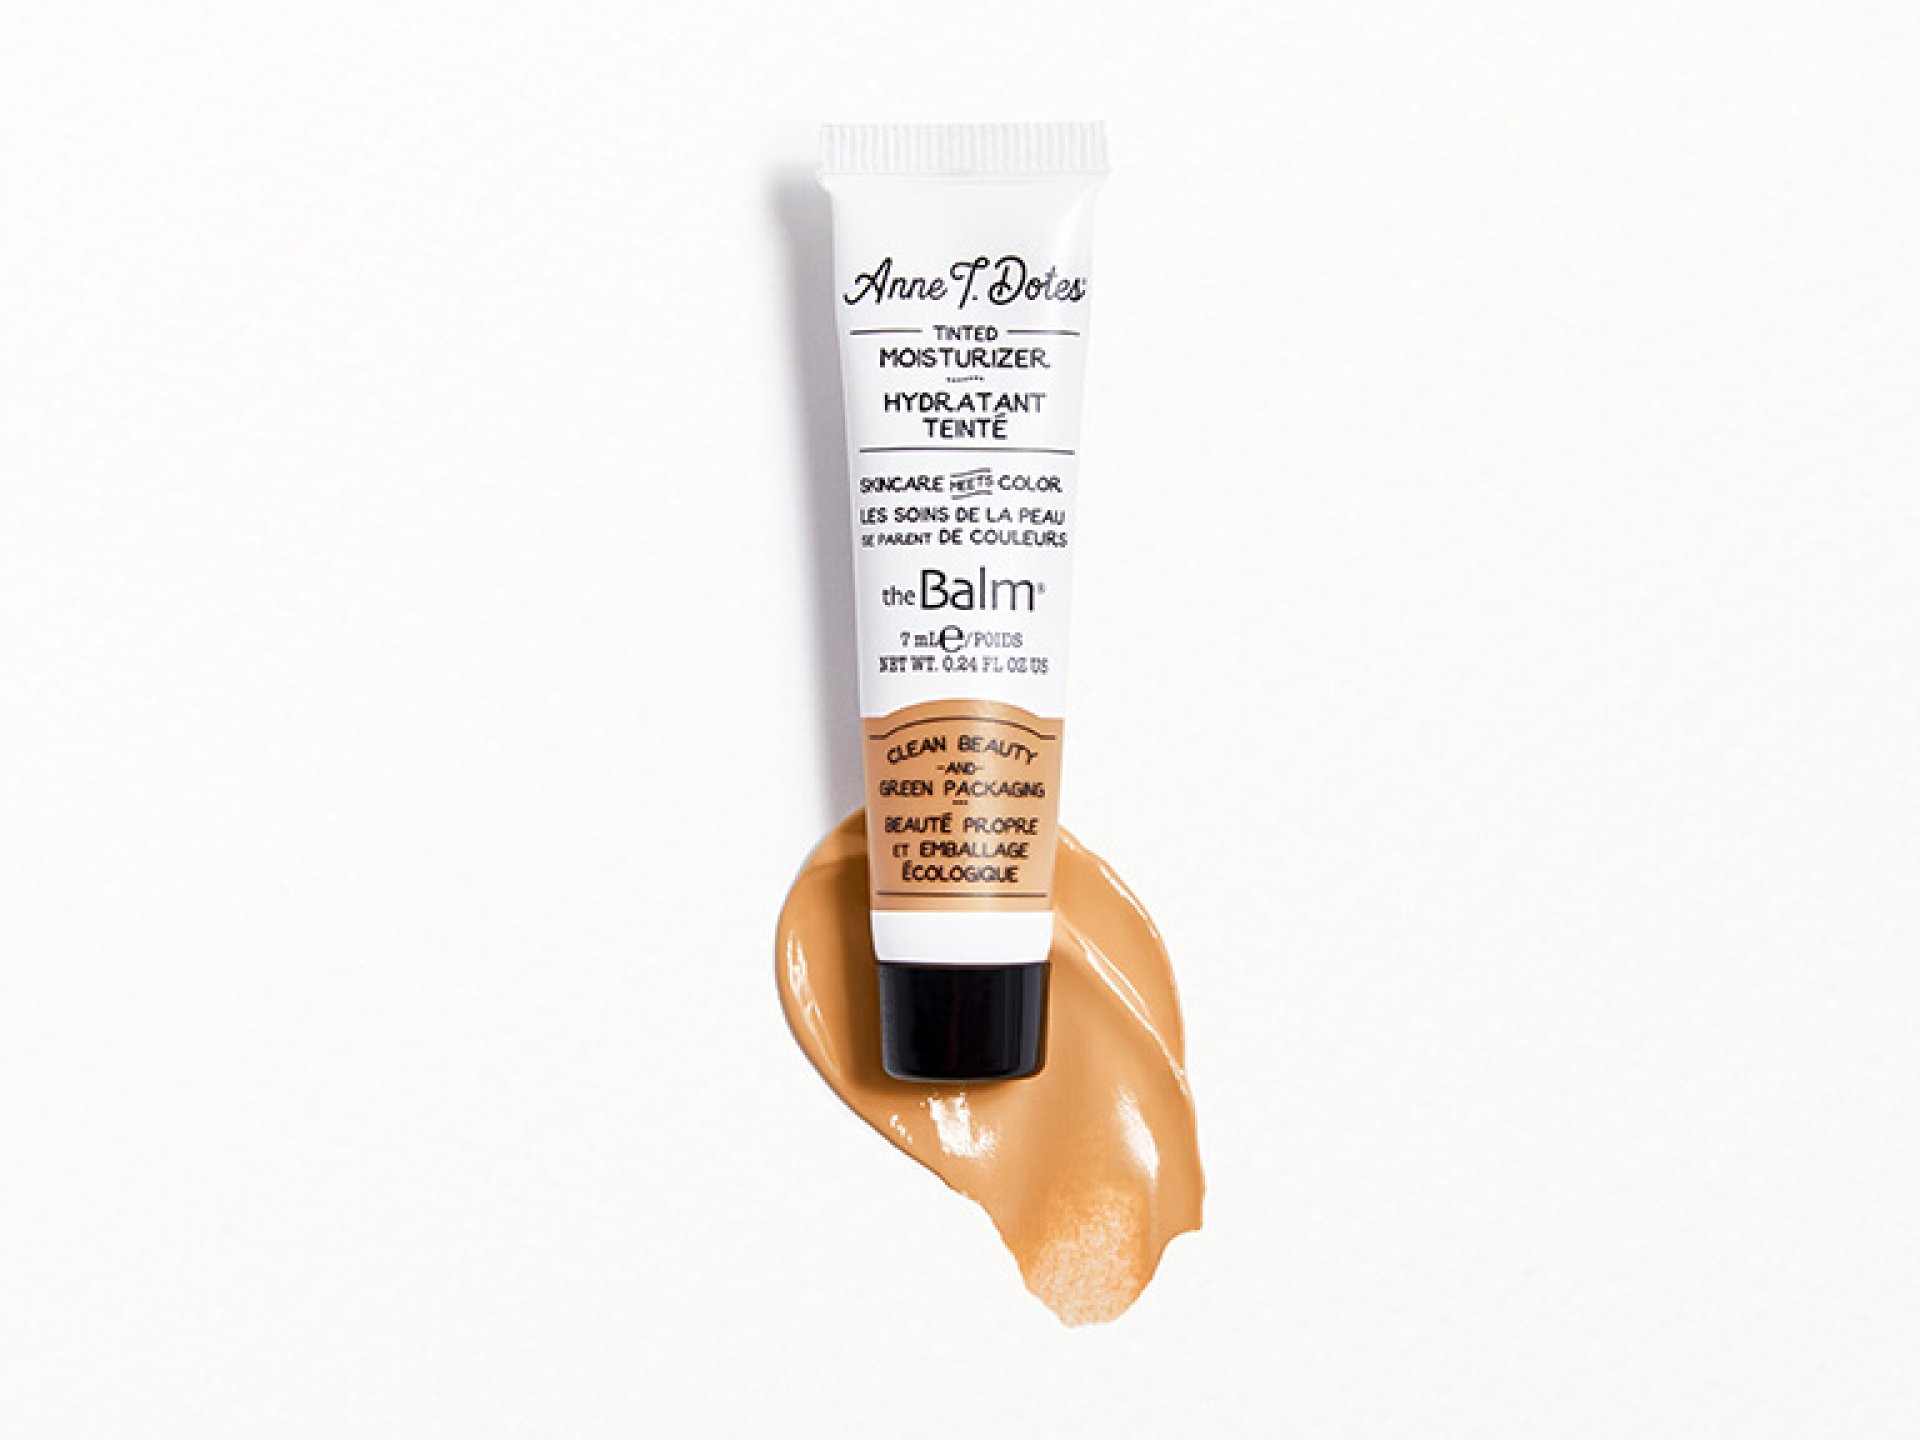 THEBALM COSMETICS Anne T. Dotes Tinted Moisturizer in #26